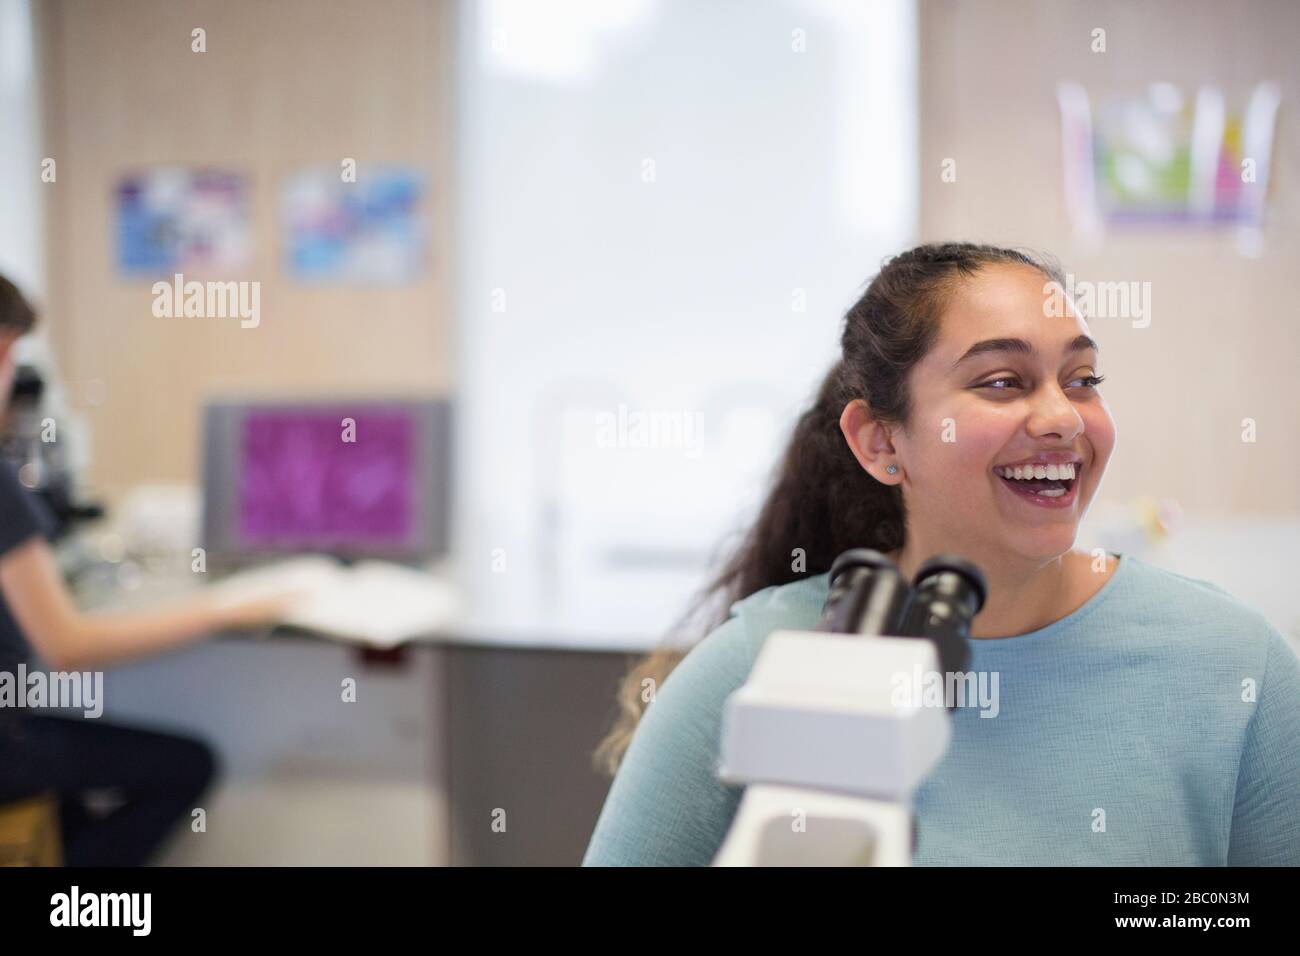 Laughing girl student at microscope in laboratory classroom Stock Photo